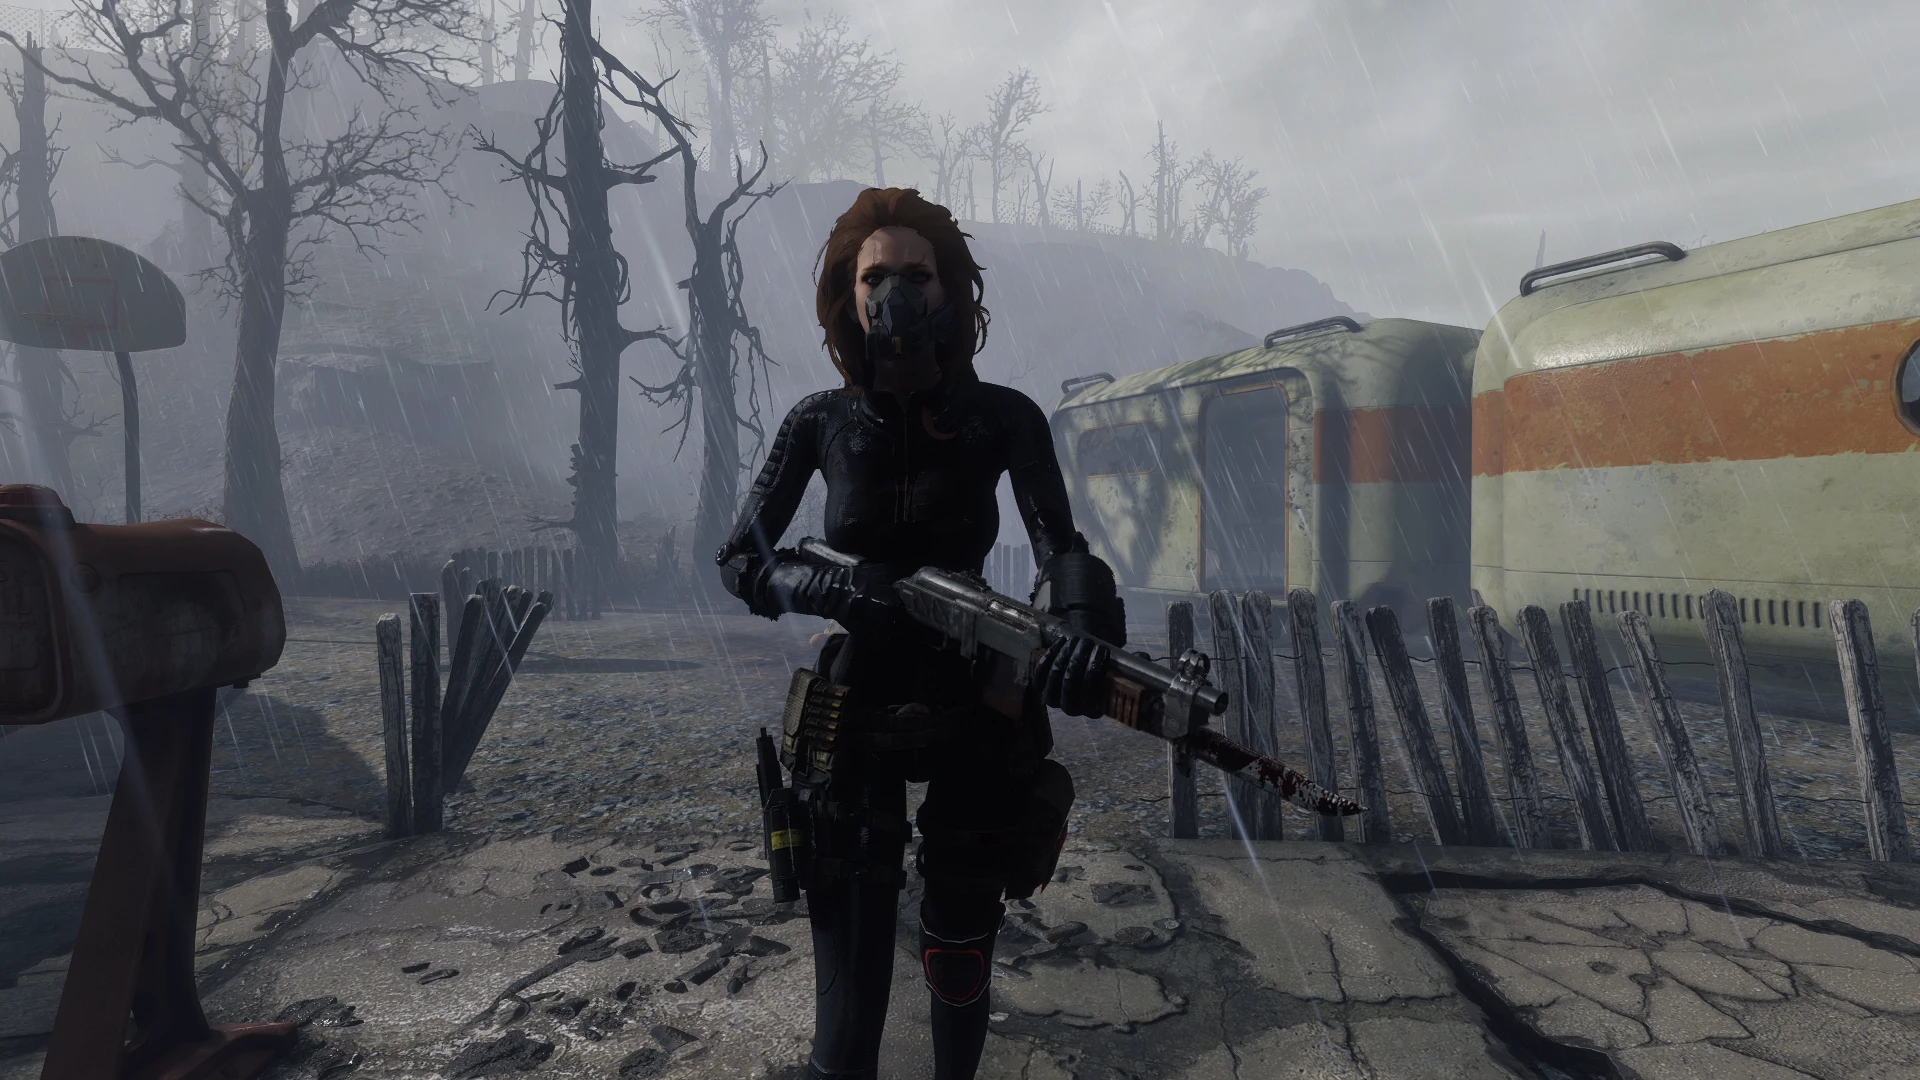 Black Widow of the Commonwealth.